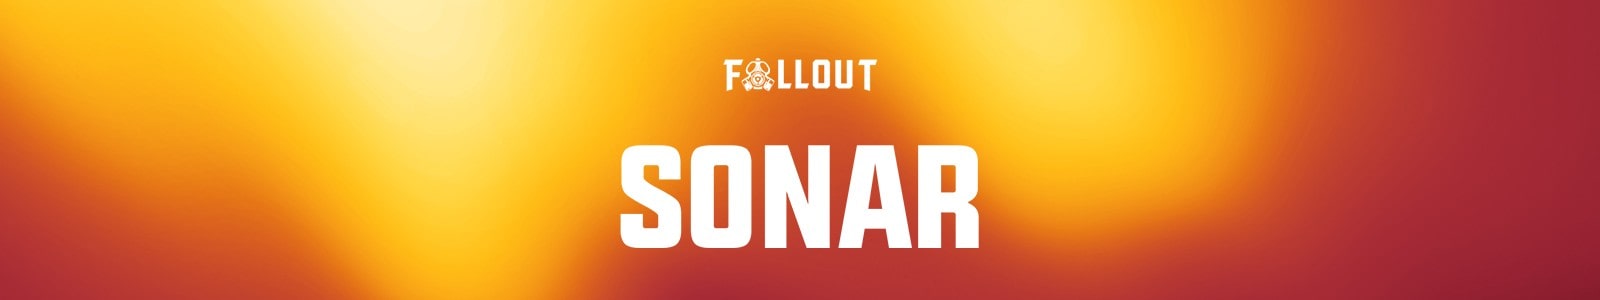 Fallout Music Group Sonar: Pings and Signatures